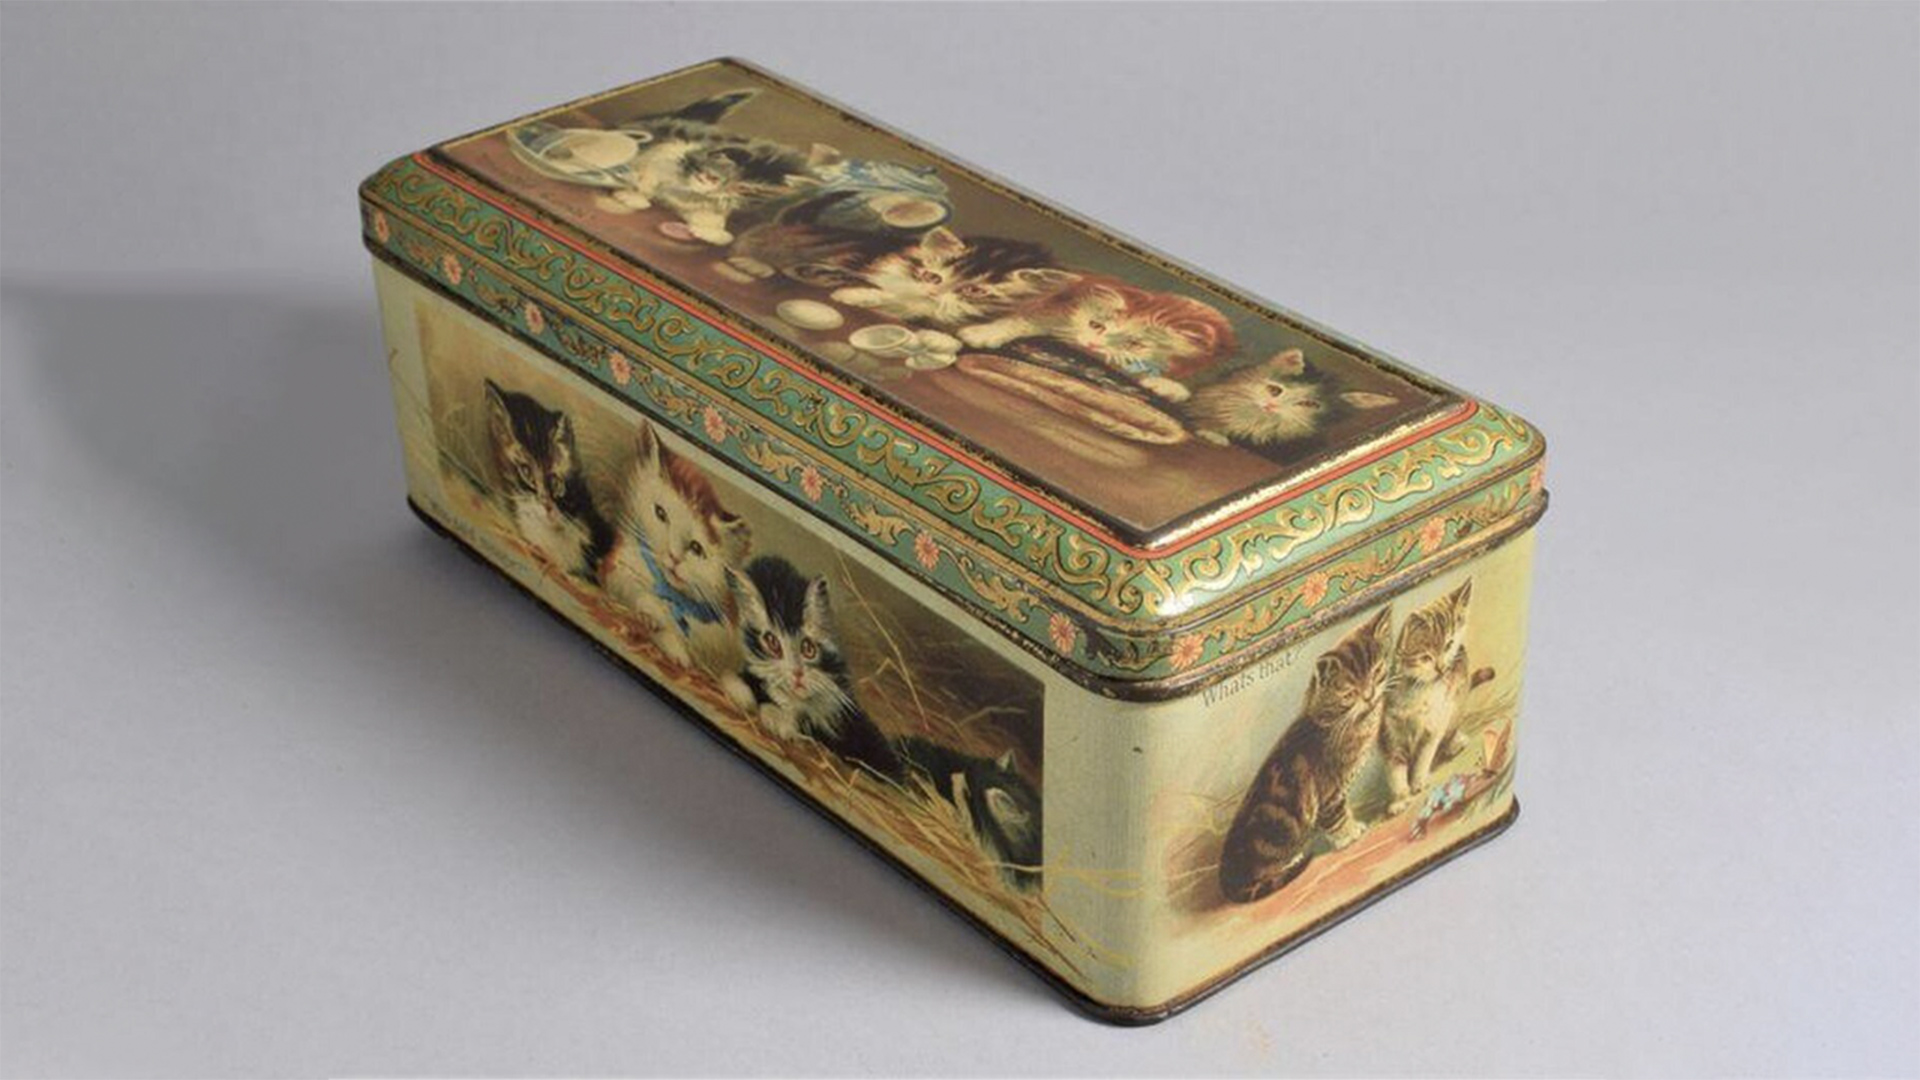 Biscuit tin printed with images of kittens